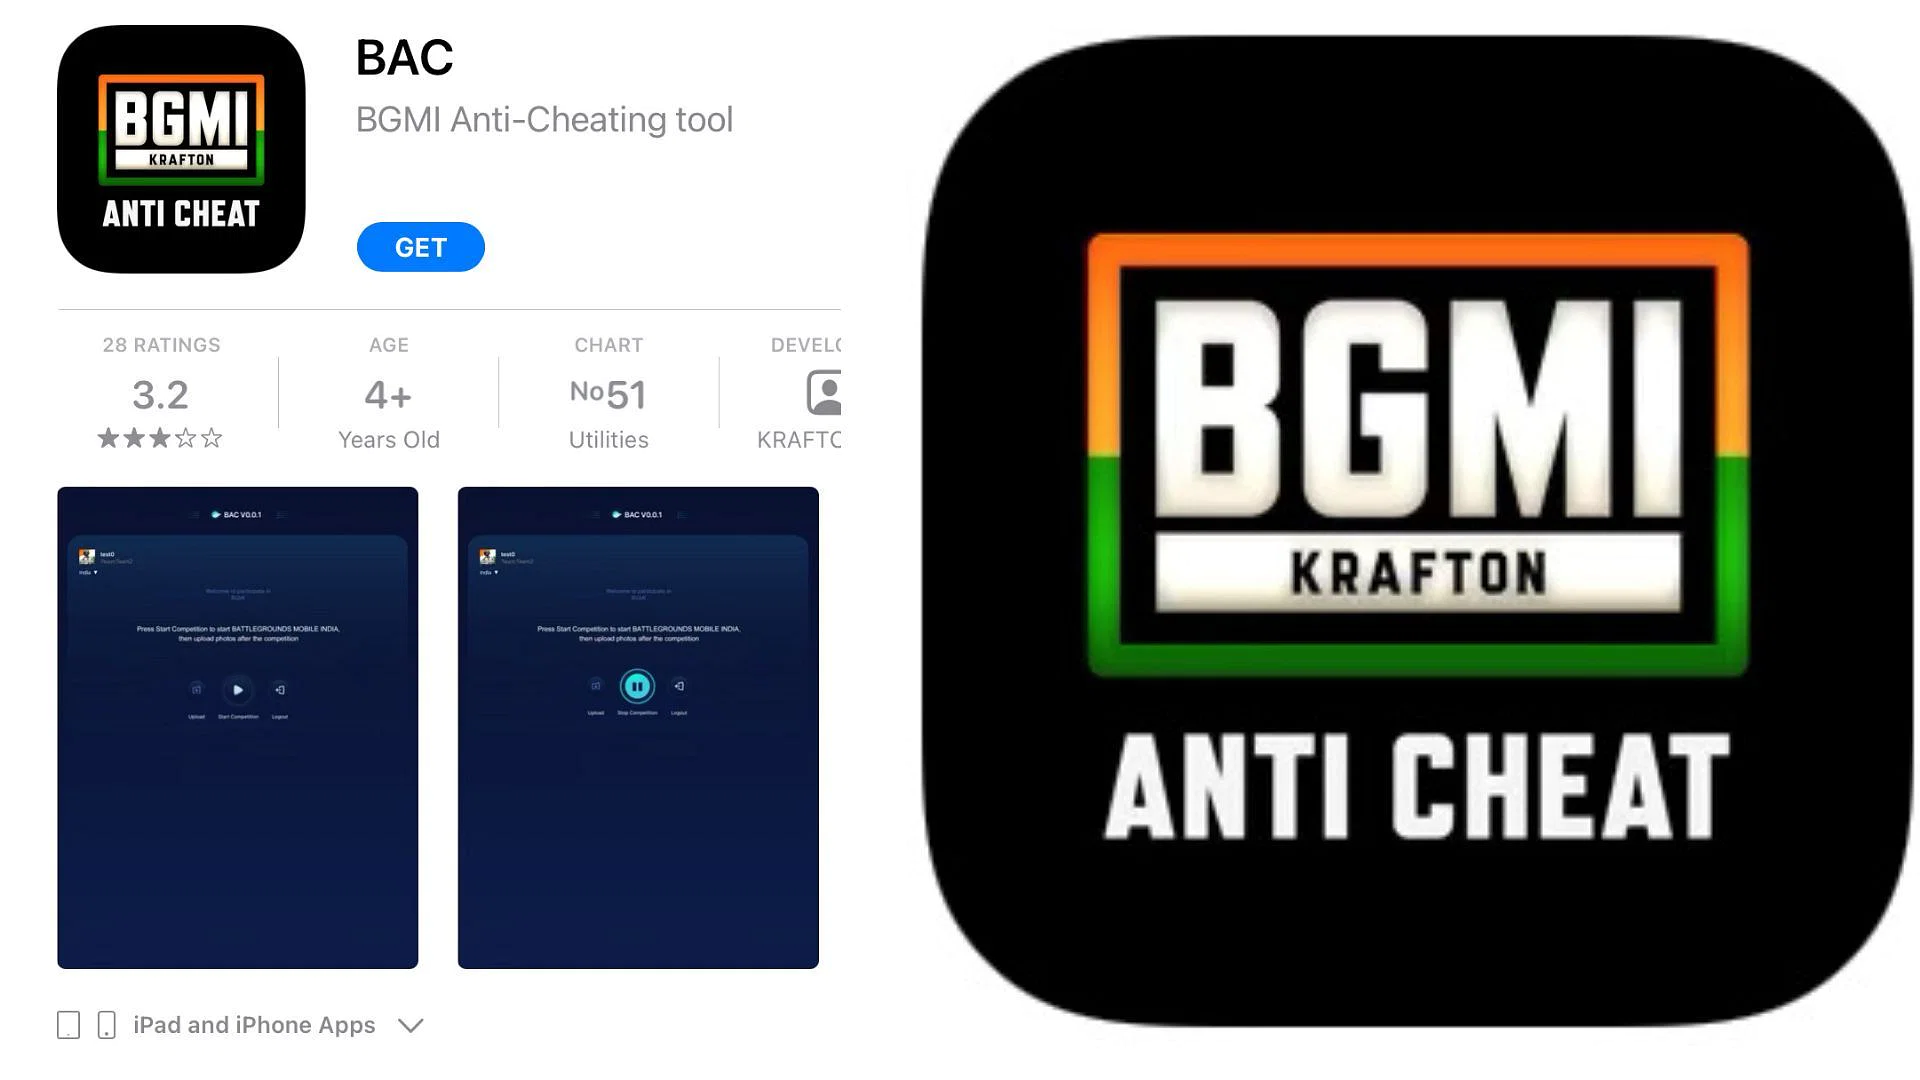 Ultimate Battle launches dedicated platform for chess; introduces  anti-cheat technology - MediaBrief